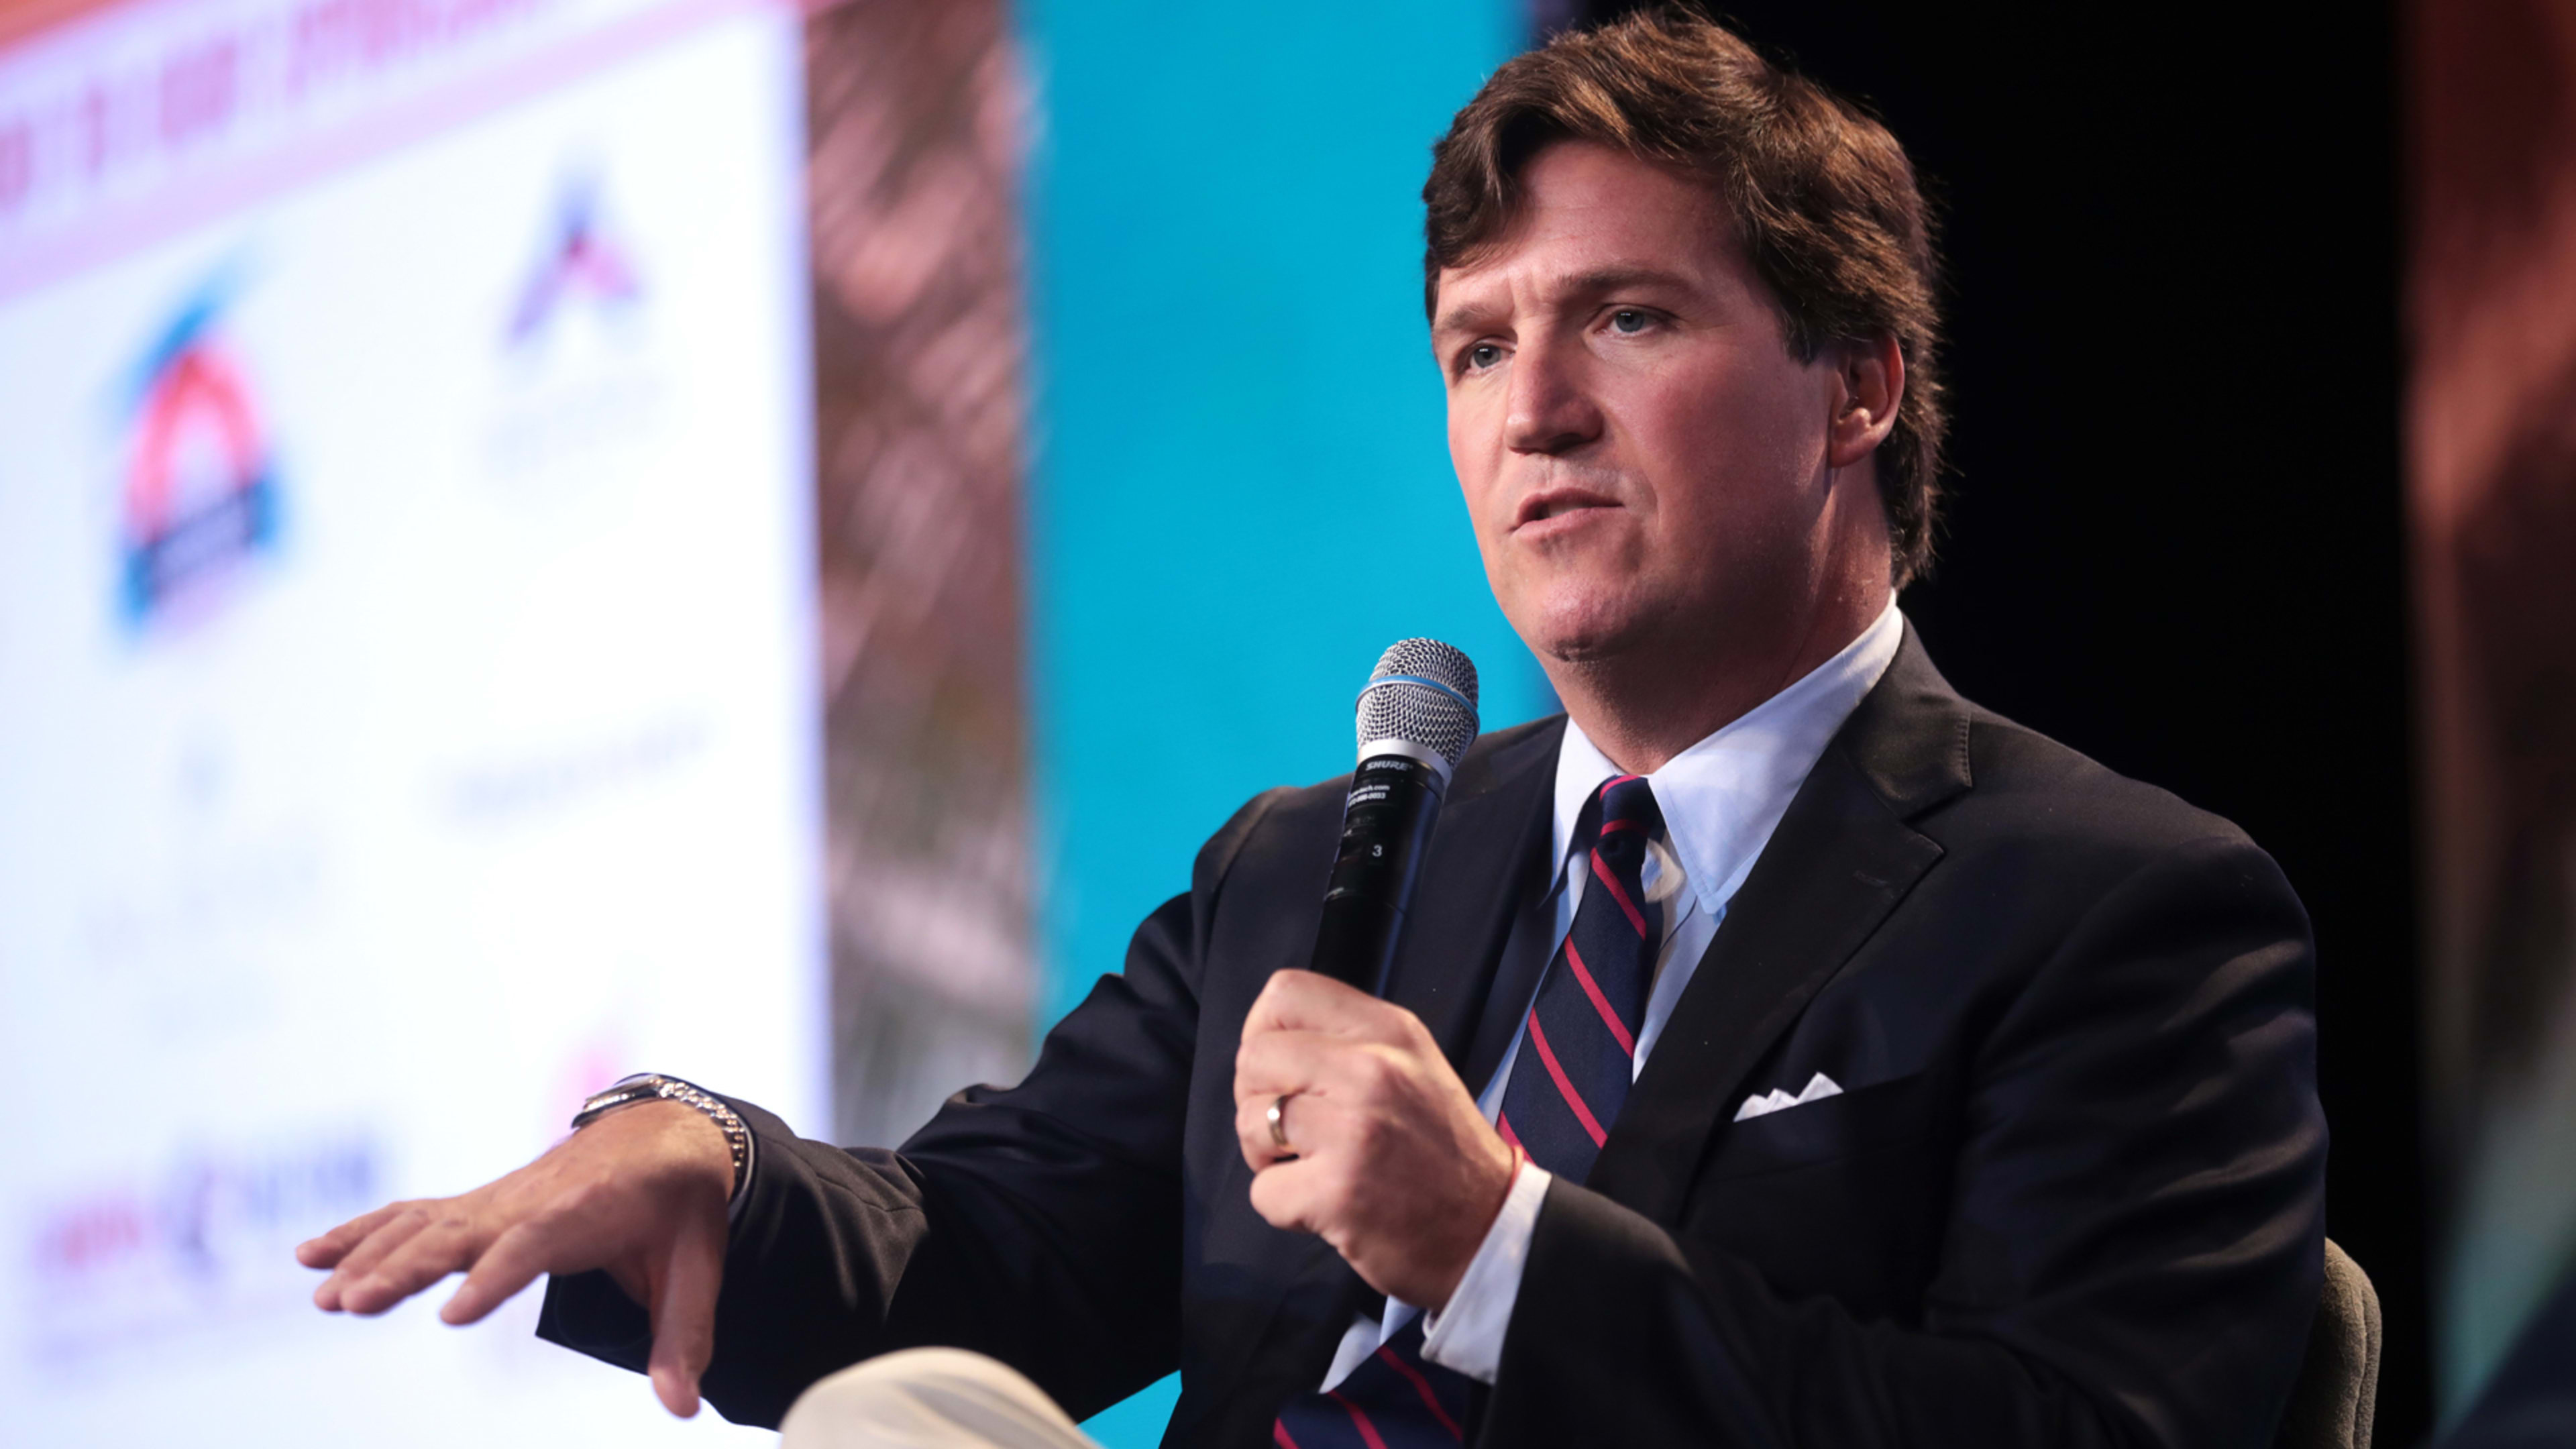 Tucker Carlson under fire for defending statutory rape, among other things